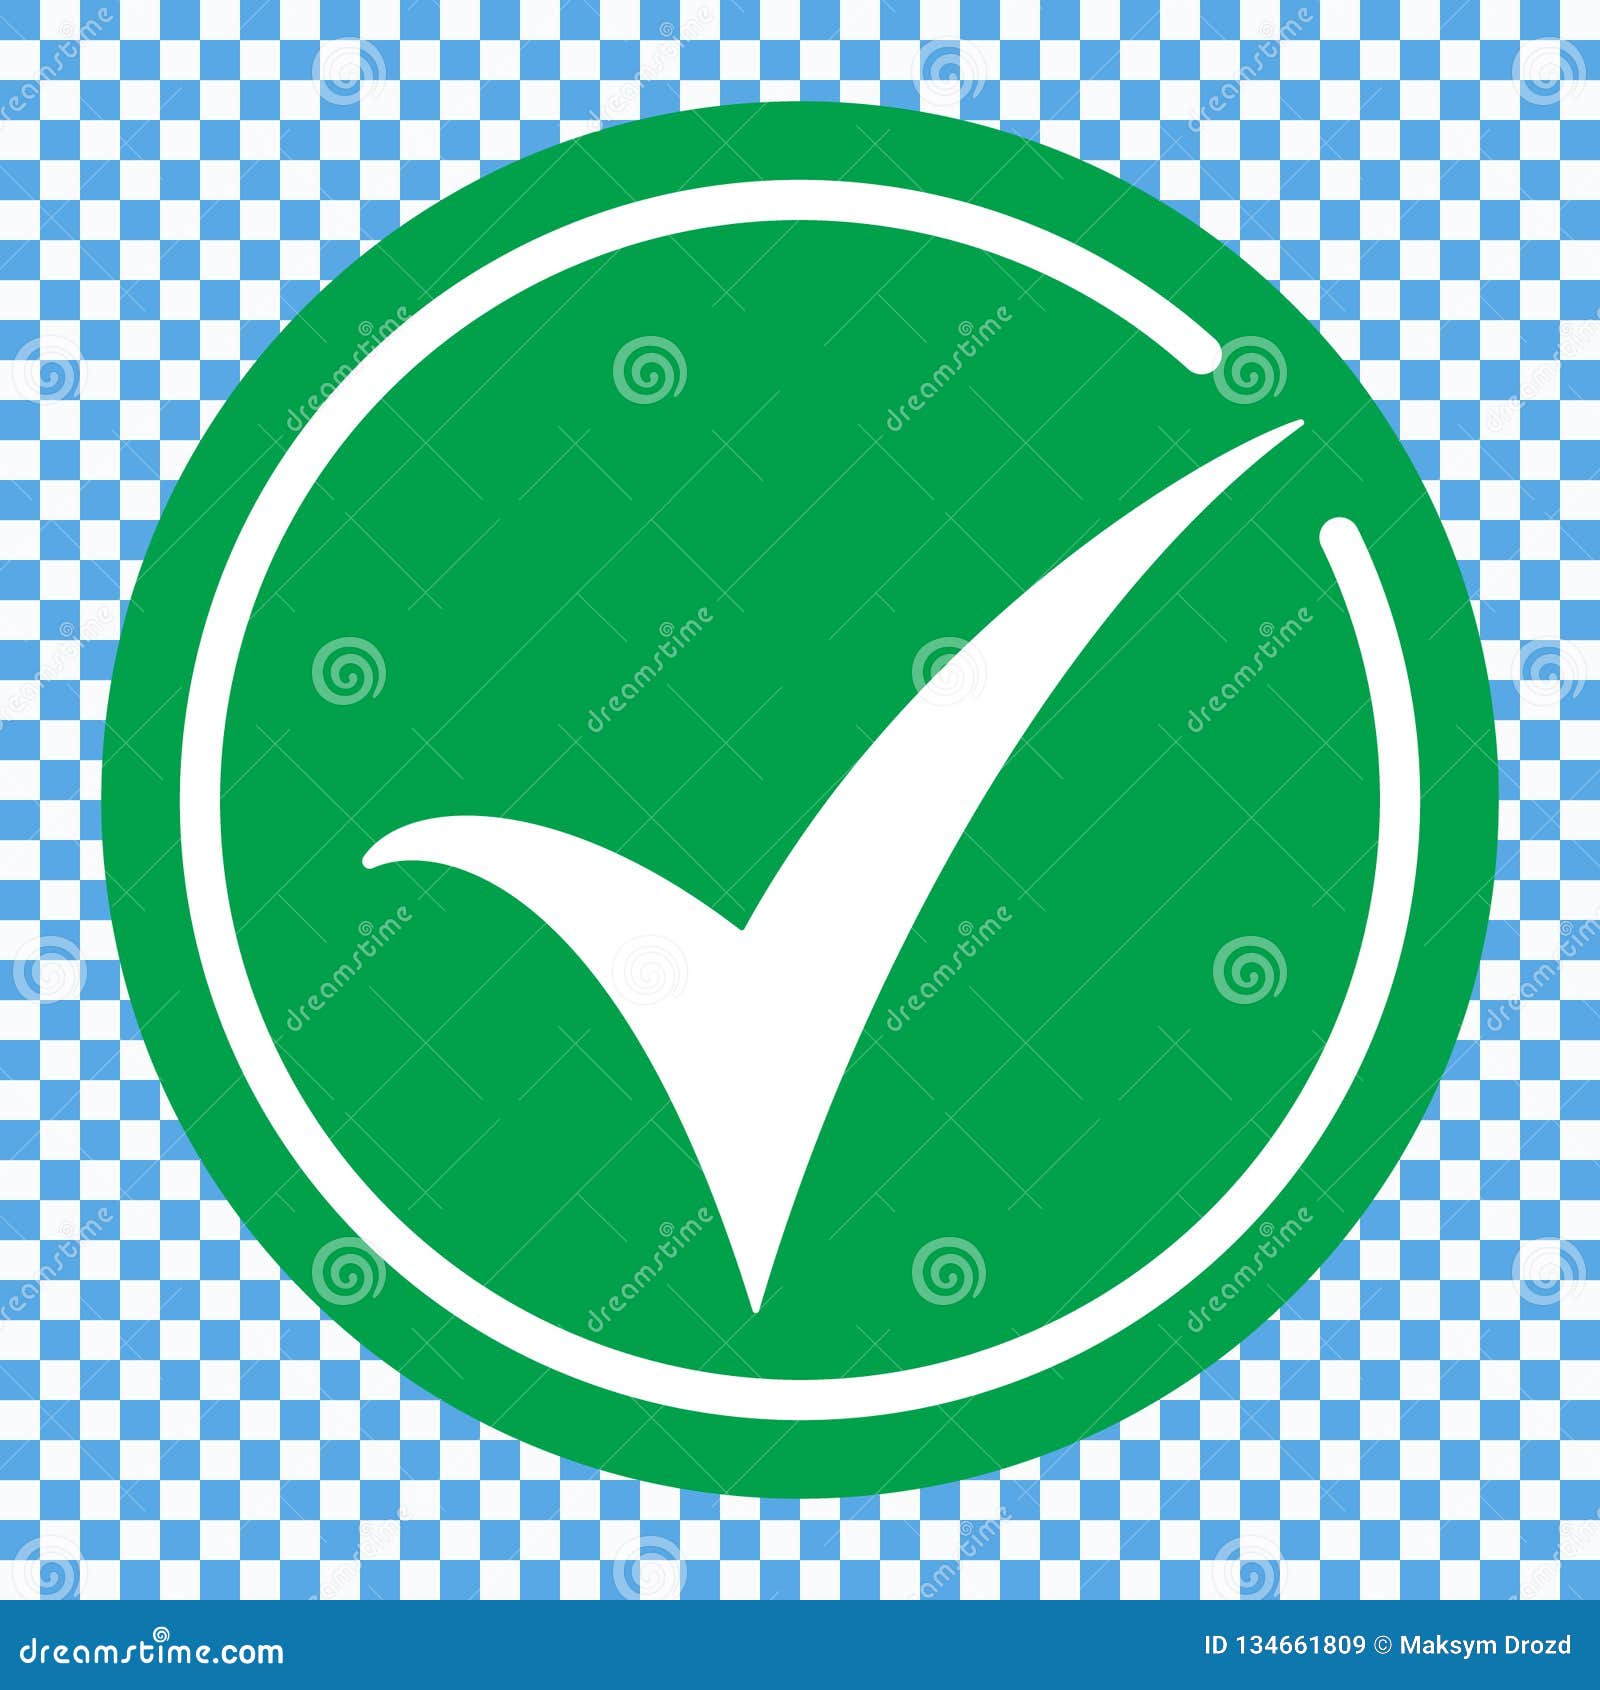 Flat Round Check Mark Green Icon, Button. Tick Symbol Isolated on ...